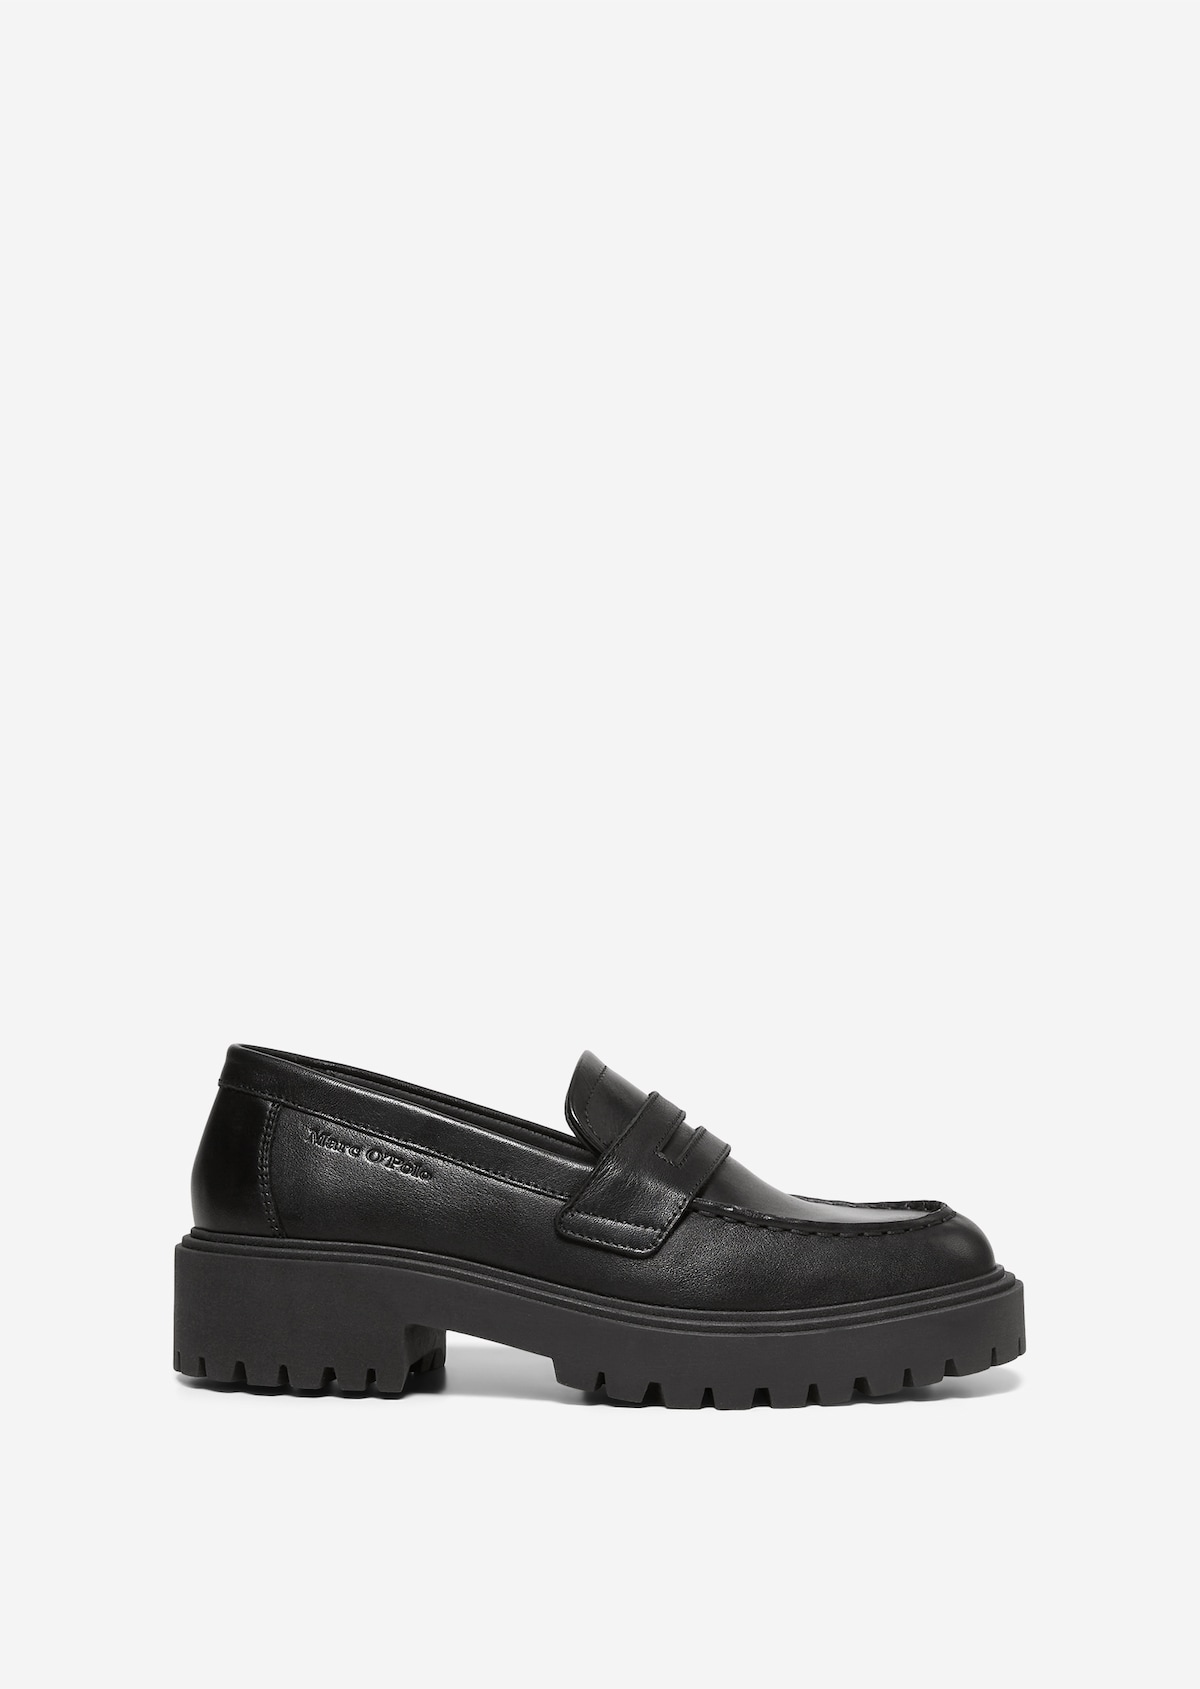 Penny loafers made from fine cowhide - black | Loafers | MARC O’POLO